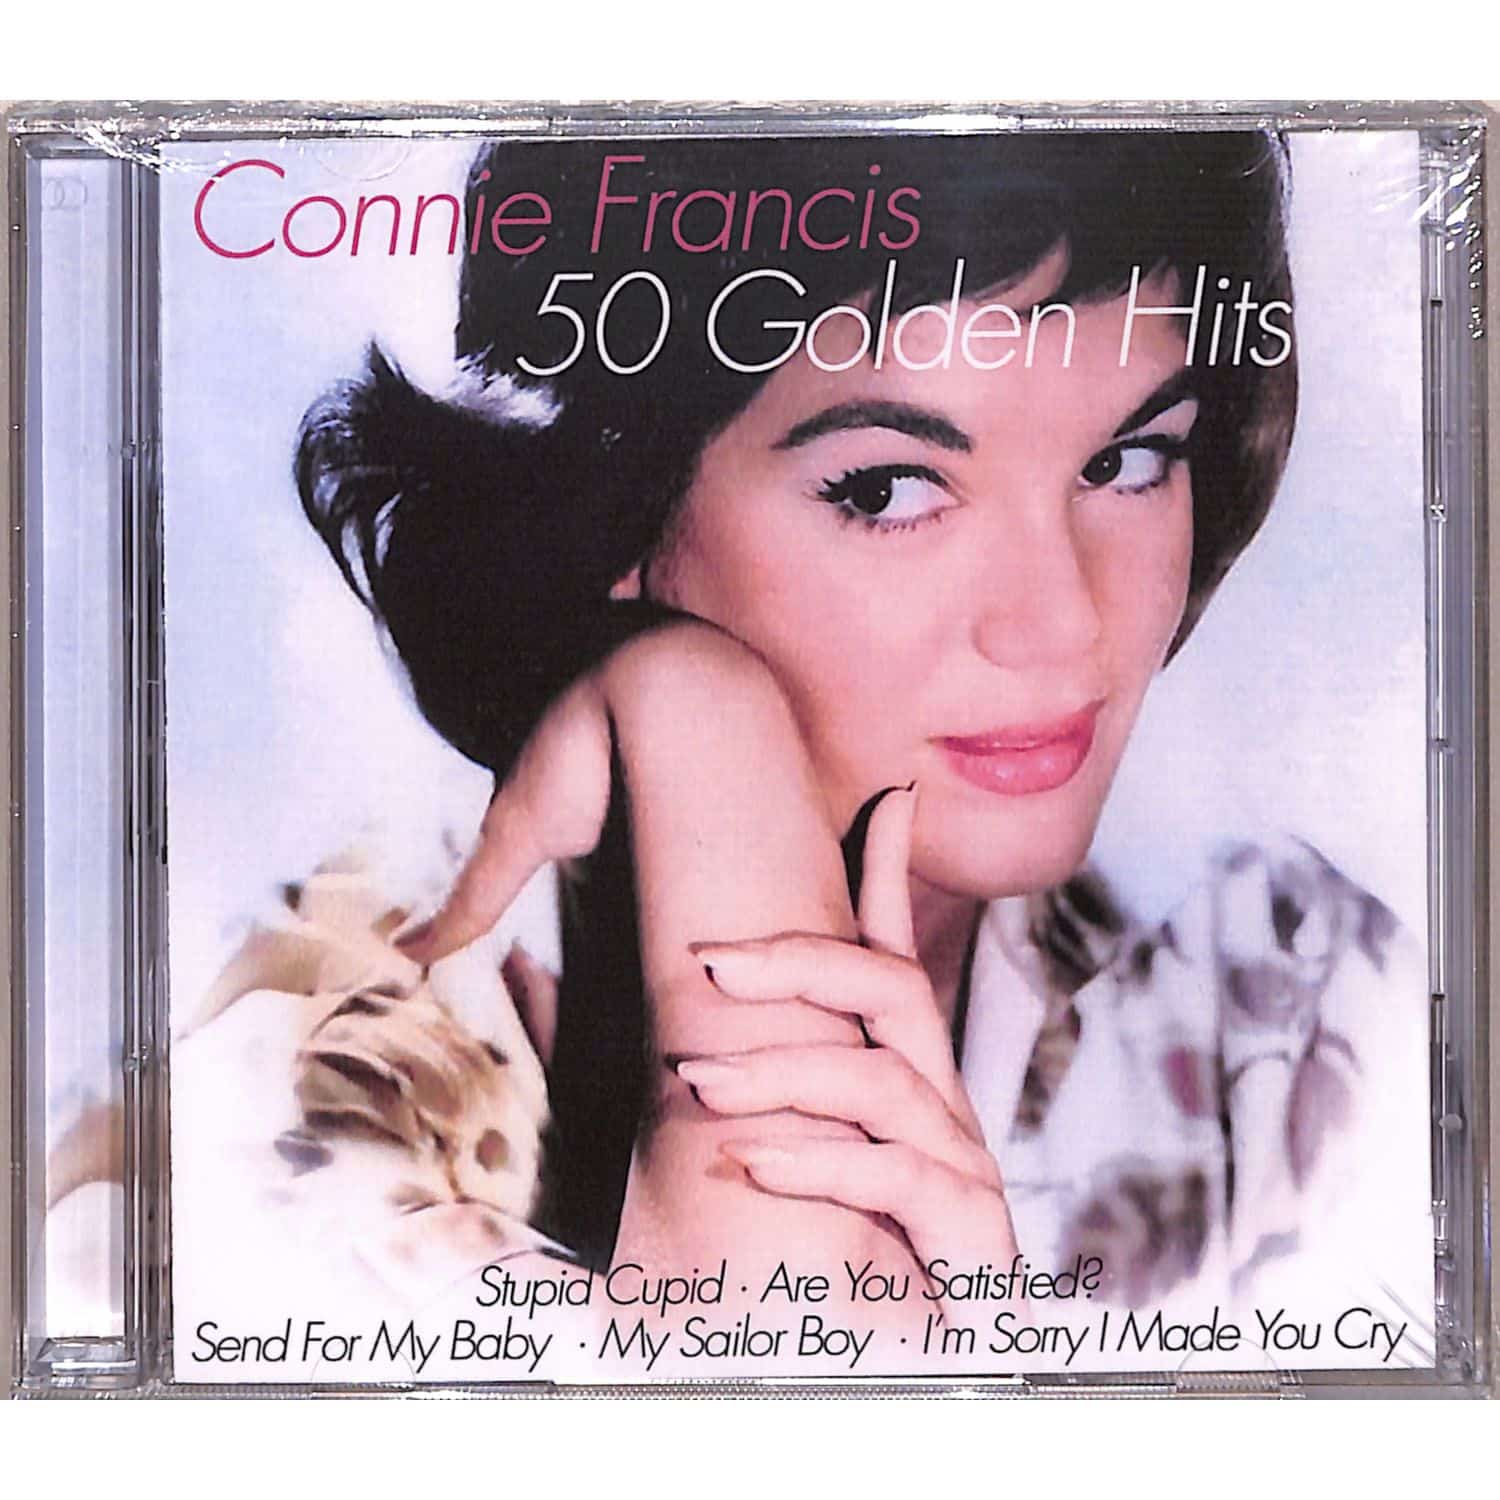 Conny Francis - 50 GOLDEN HITS 